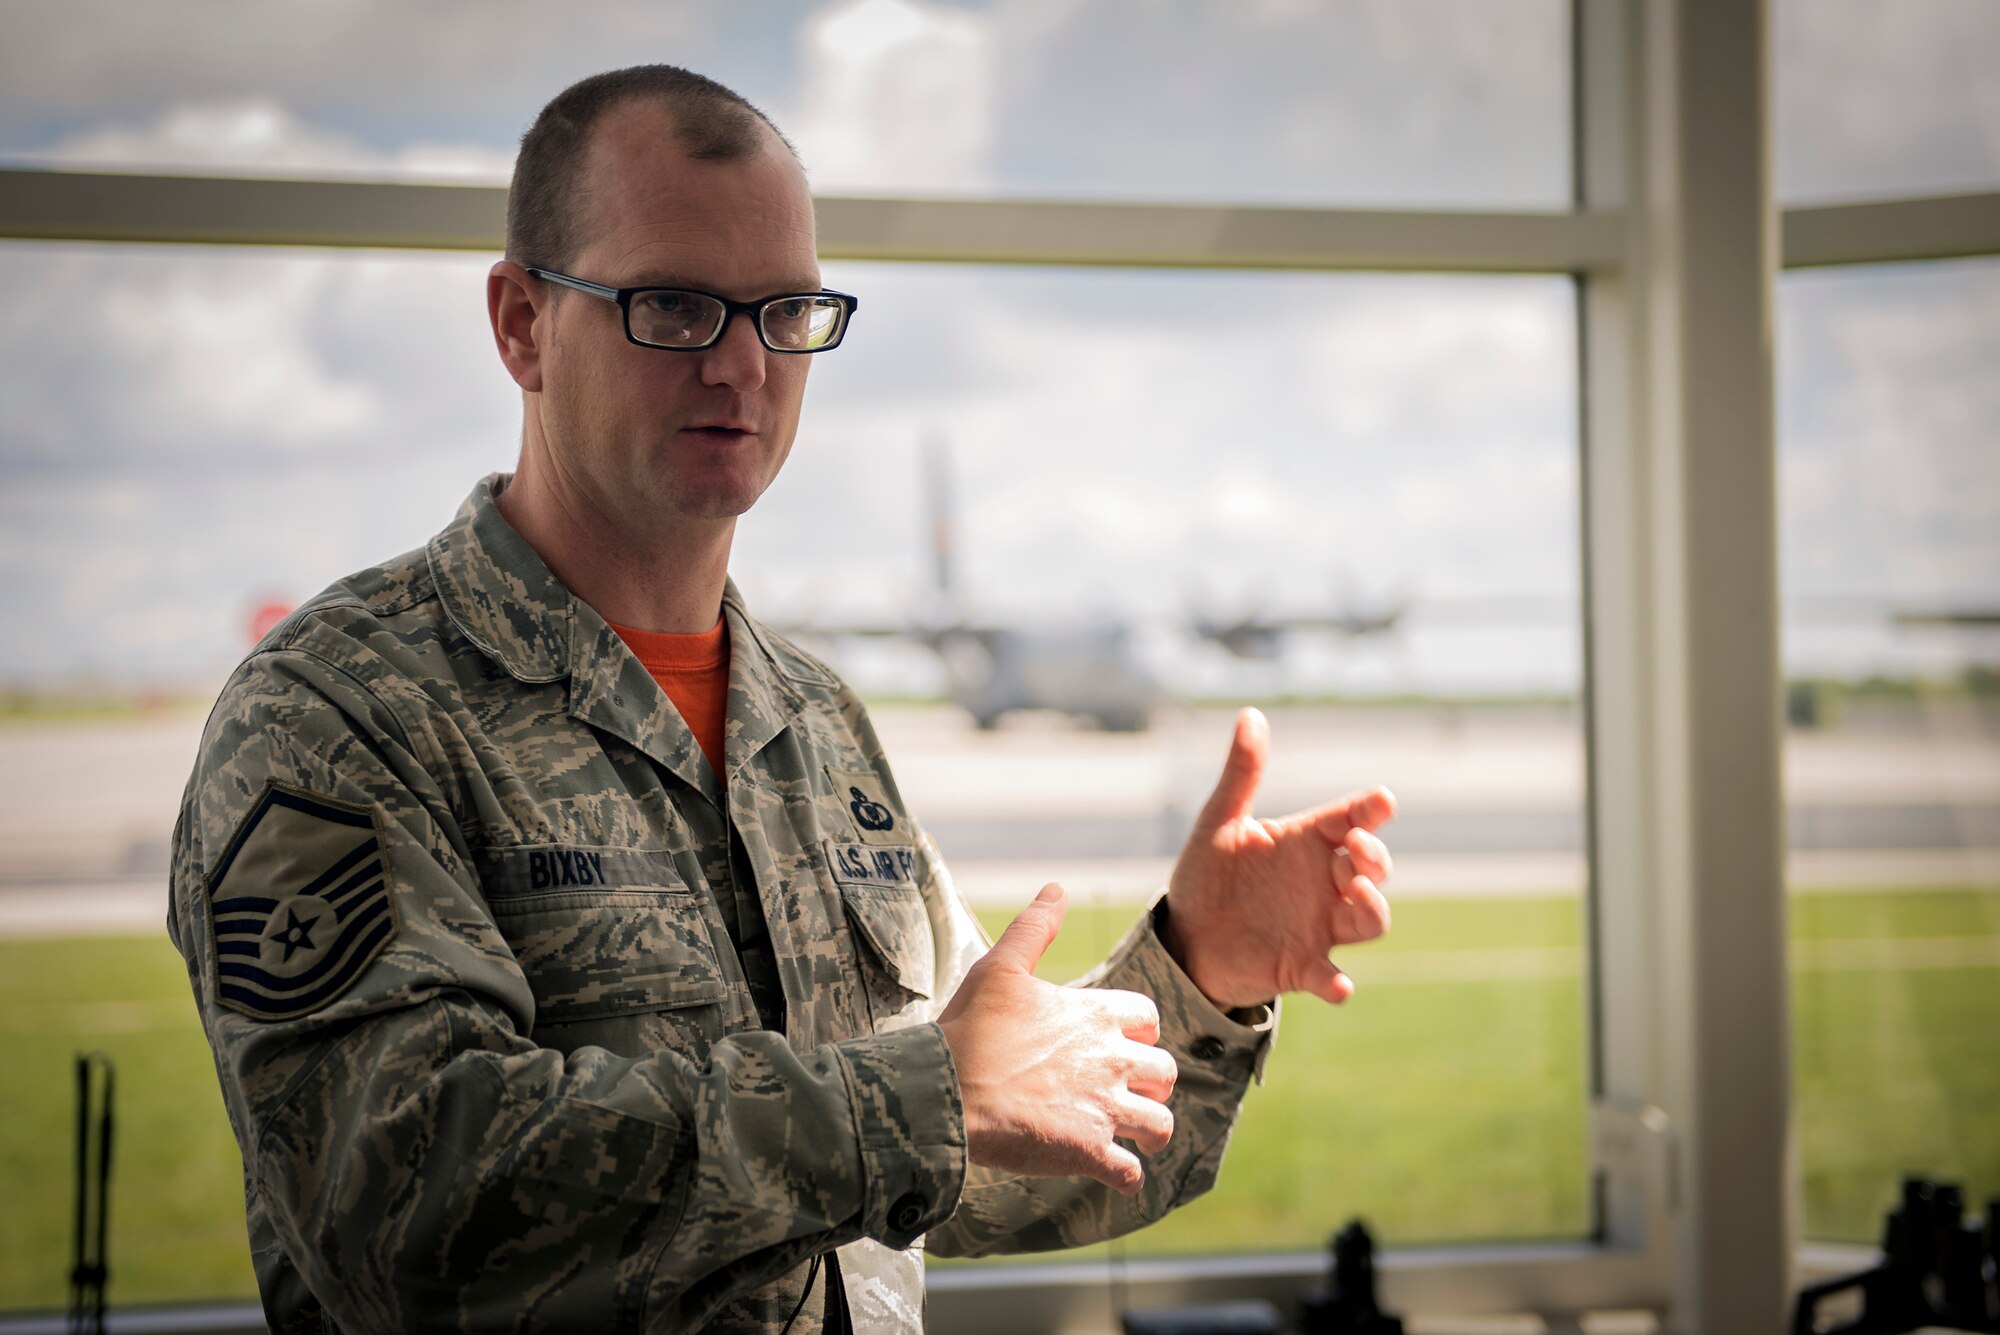 U.S. Air Force Master Sgt. Brent Bixby, the airfield management superintendent with the 182nd Operations Support Squadron, Illinois Air National Guard, explains his job duties in Peoria, Ill., May 6, 2017.  Airfield management specialists are responsible for maintaining safe airfield operating environments for aircrew and aircraft. (U.S. Air National Guard photo by Tech. Sgt. Lealan Buehrer)